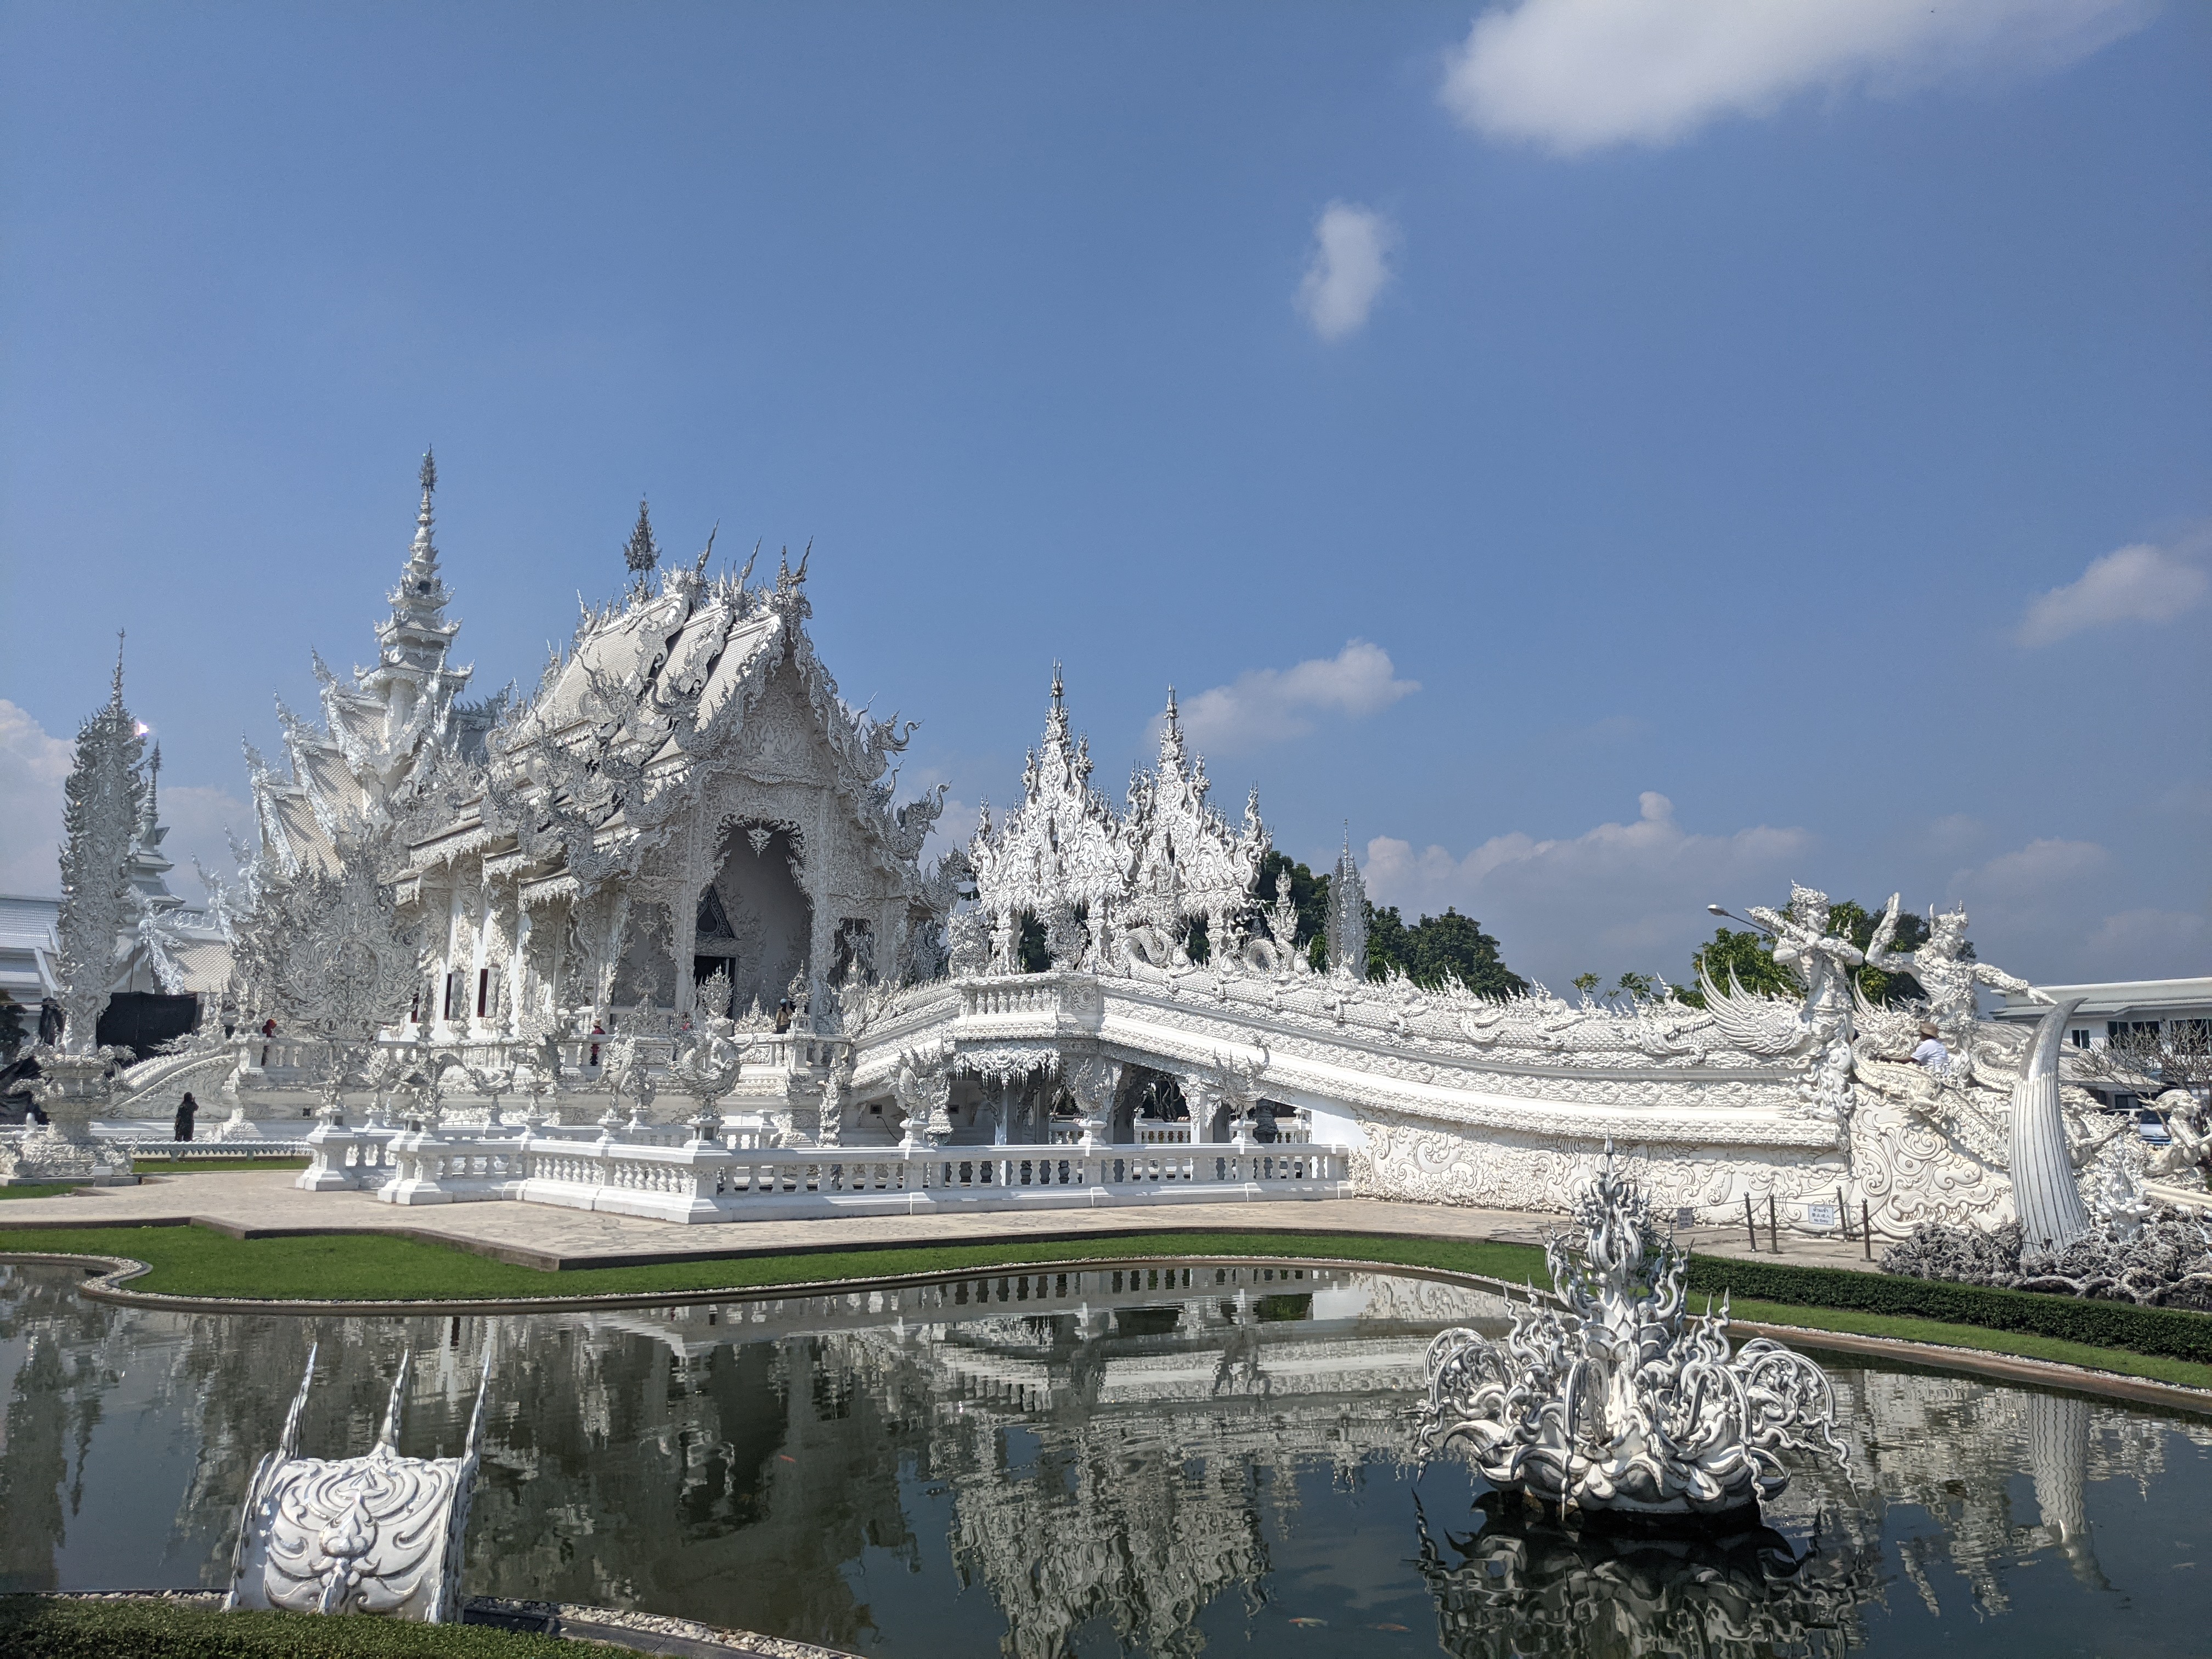 Photos do not do Wat Rong Khun justice. In real life, the whole building glistens in the light.